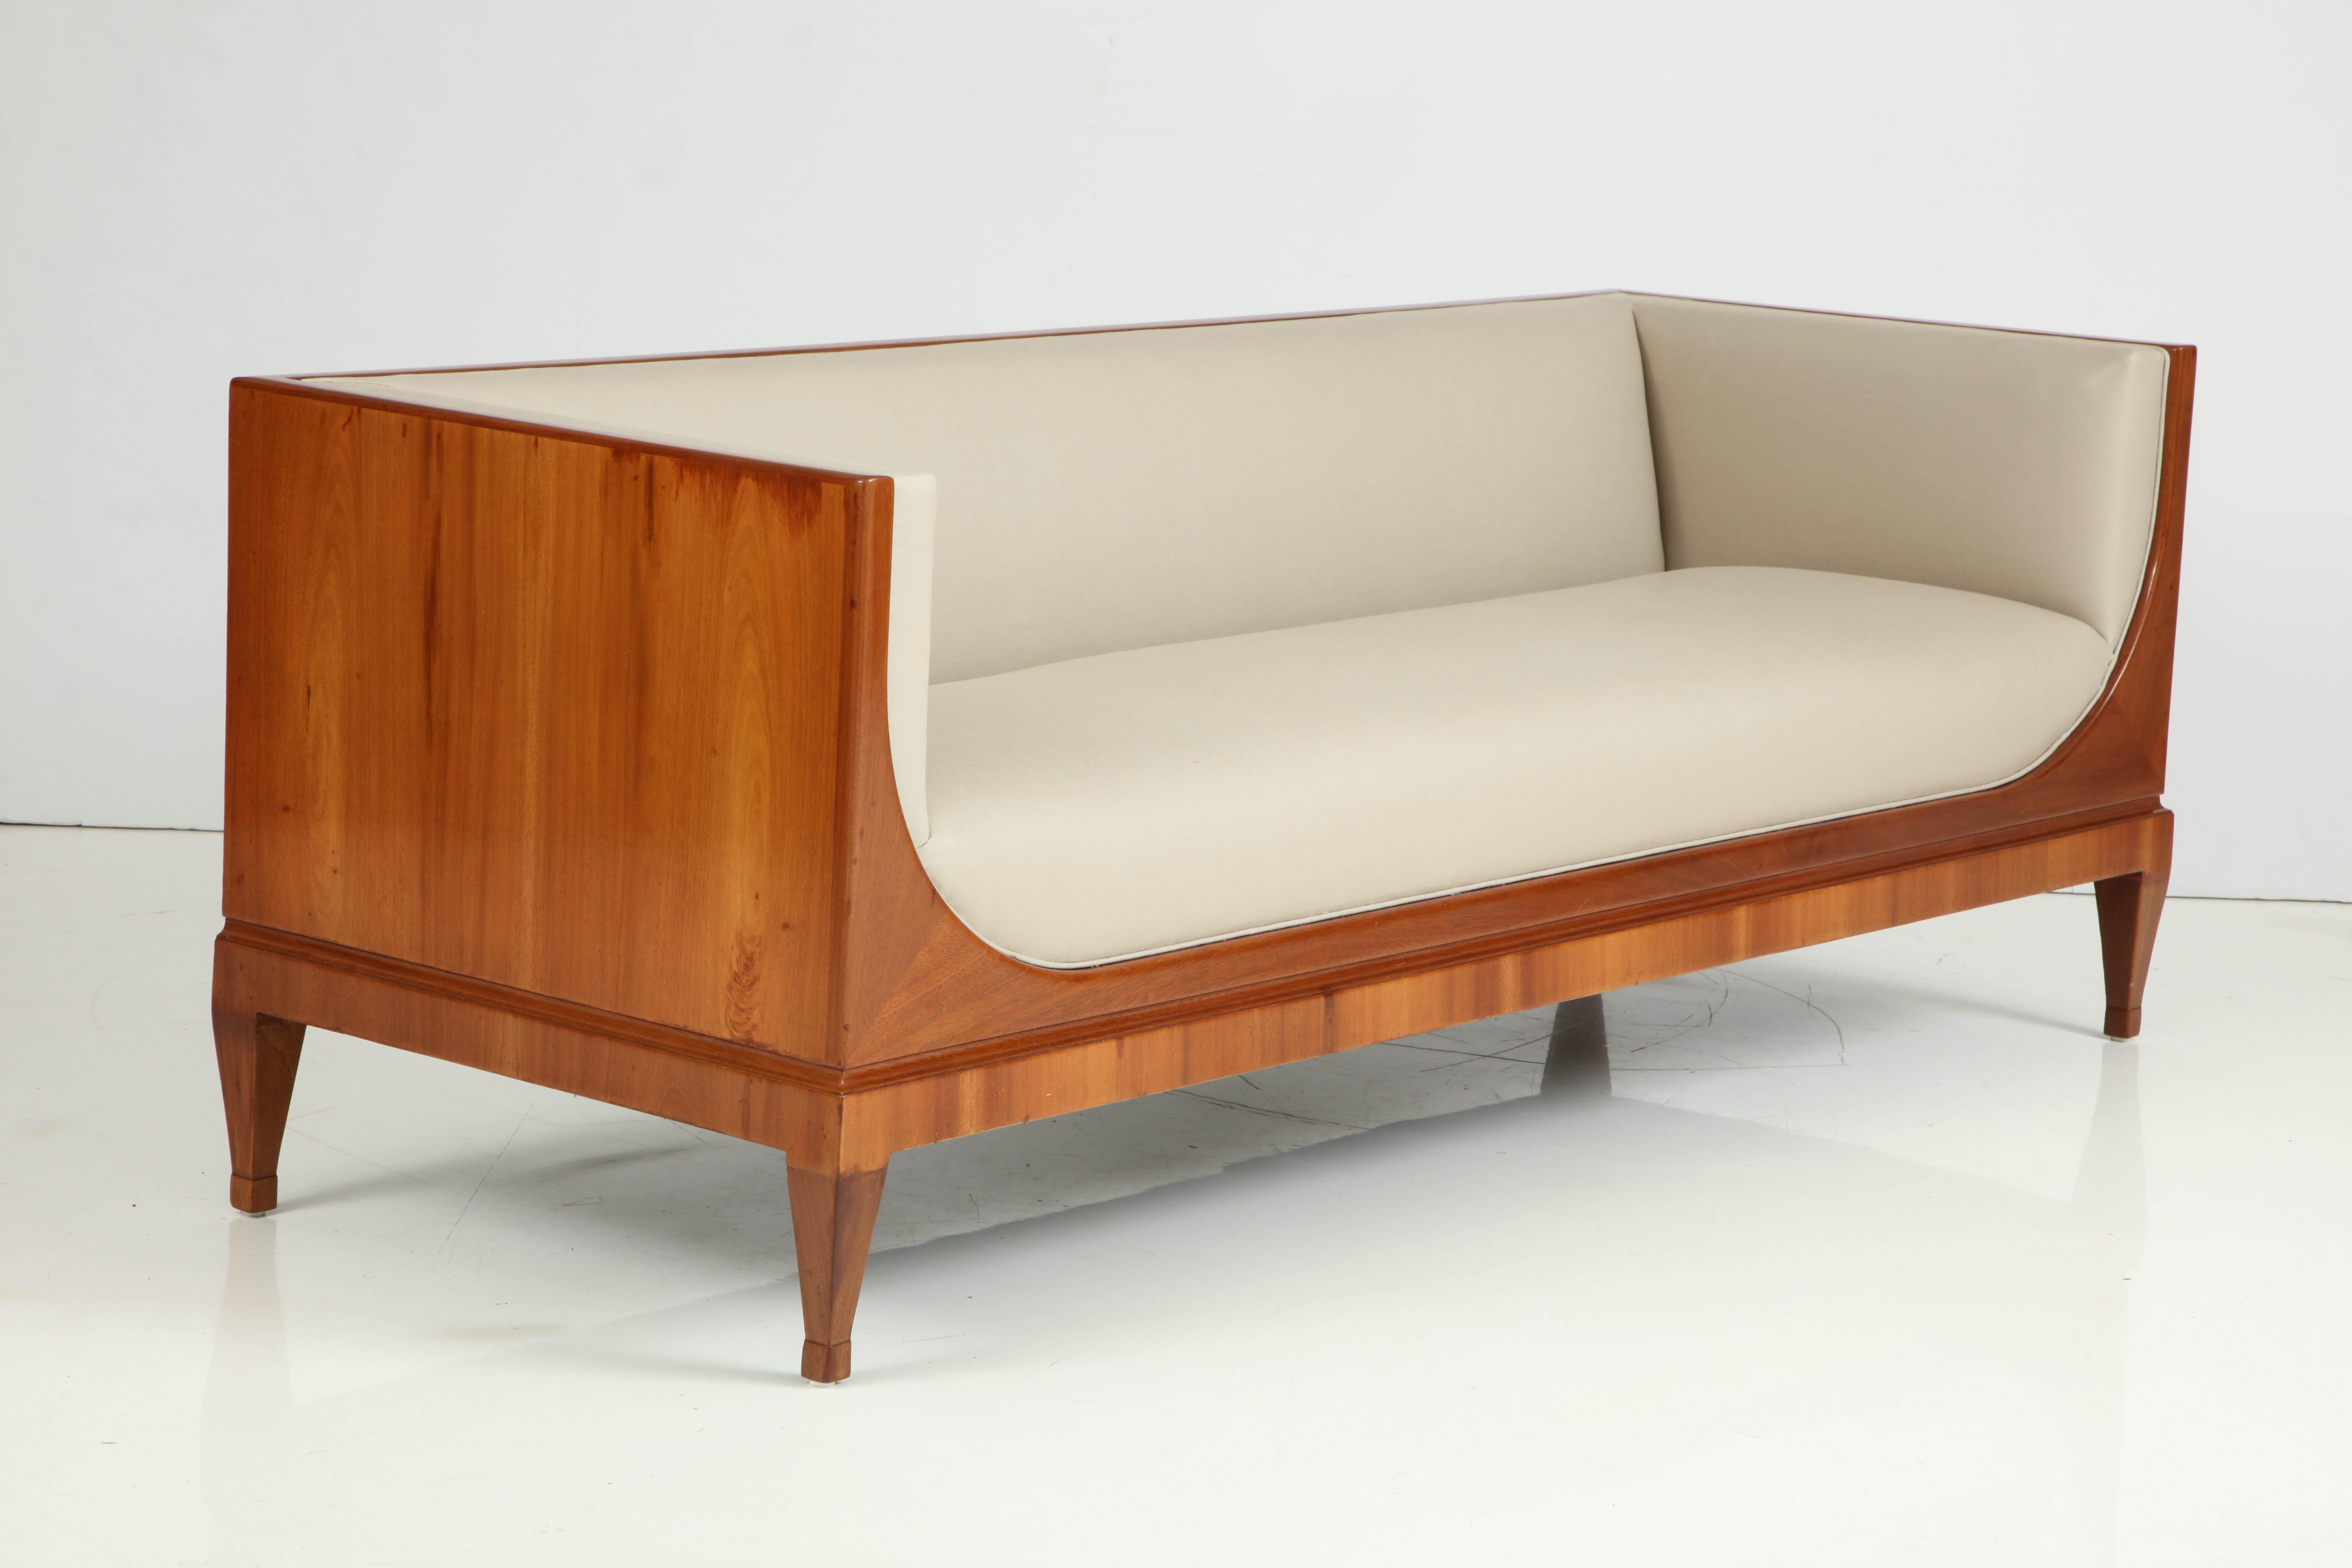 A Classic Frits Henningsen rich mahogany and upholstered sofa, circa 1930s, rectangular upholstered backrest and sides, front frieze with graceful curved ends, above a recessed plinth base raised on square tapered legs ending with blocks.
Original